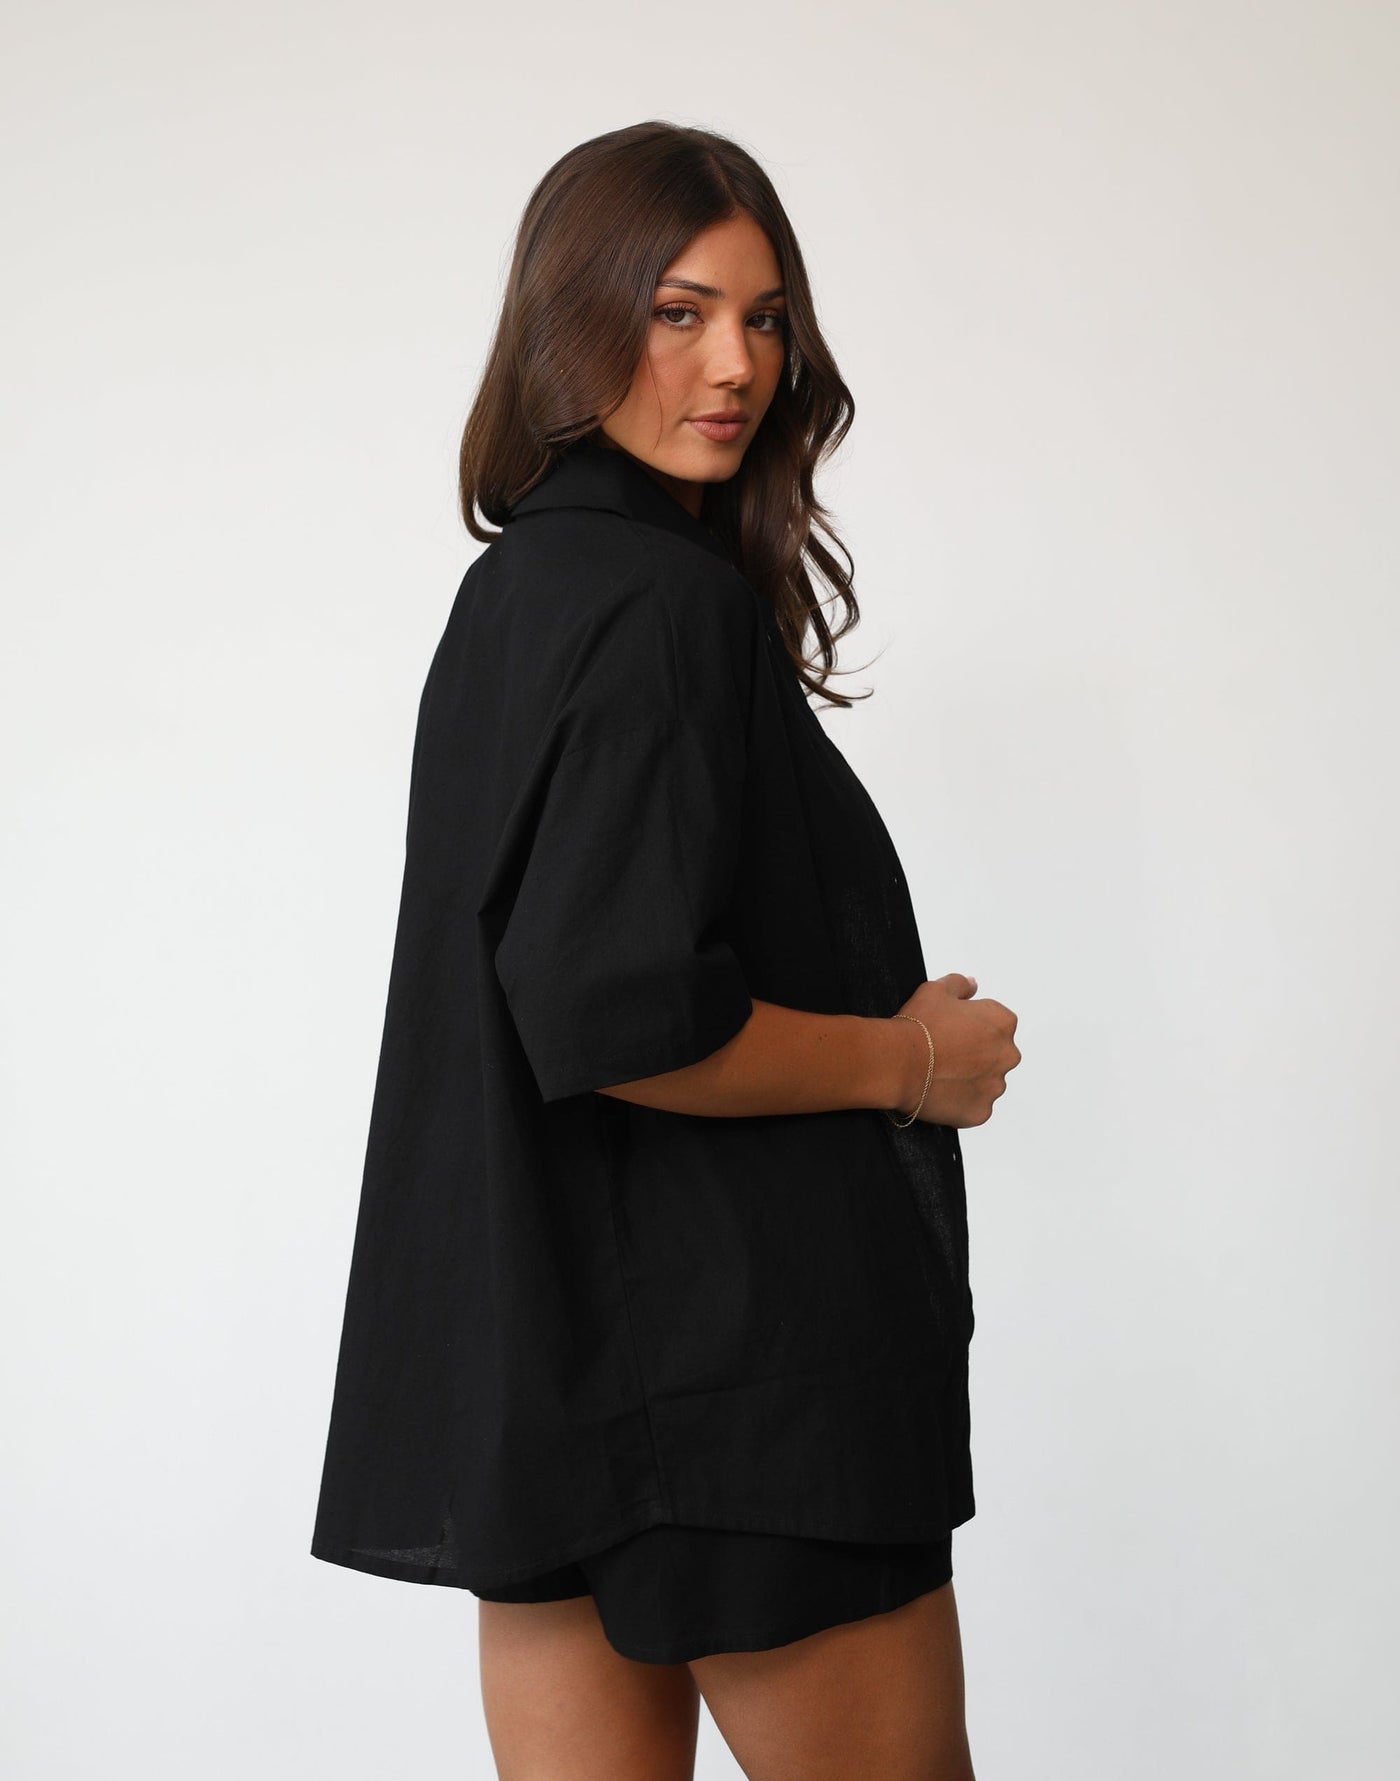 Klara Shirt (Black) | Charcoal Clothing Exclusive - Collared Button Up Oversized Short Sleeve Shirt - Women's Top - Charcoal Clothing